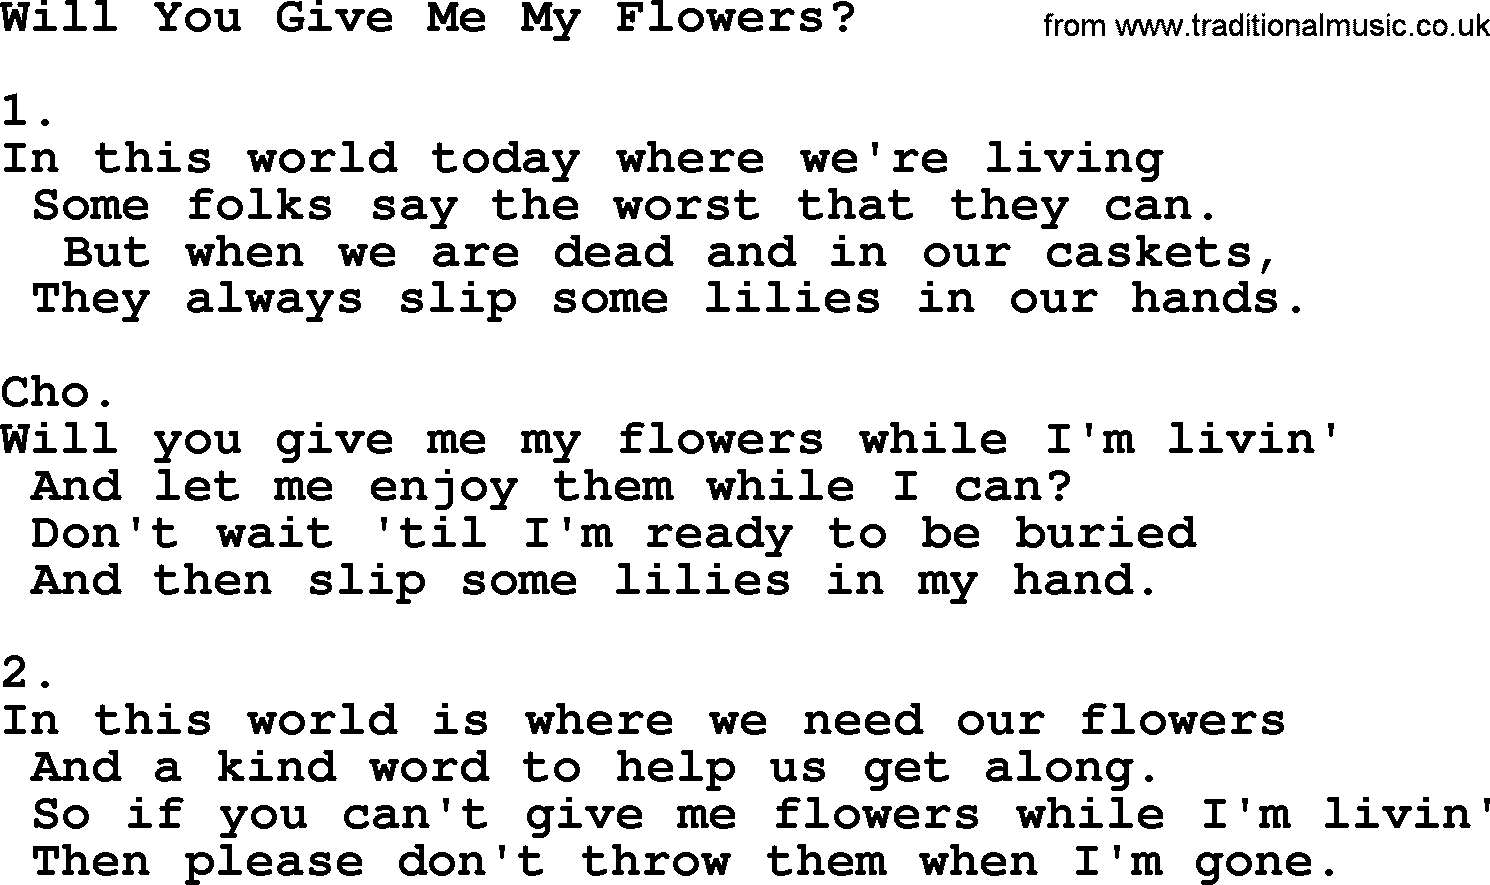 Apostolic & Pentecostal Hymns and Songs, Hymn: Will You Give Me My Flowers_ lyrics and PDF